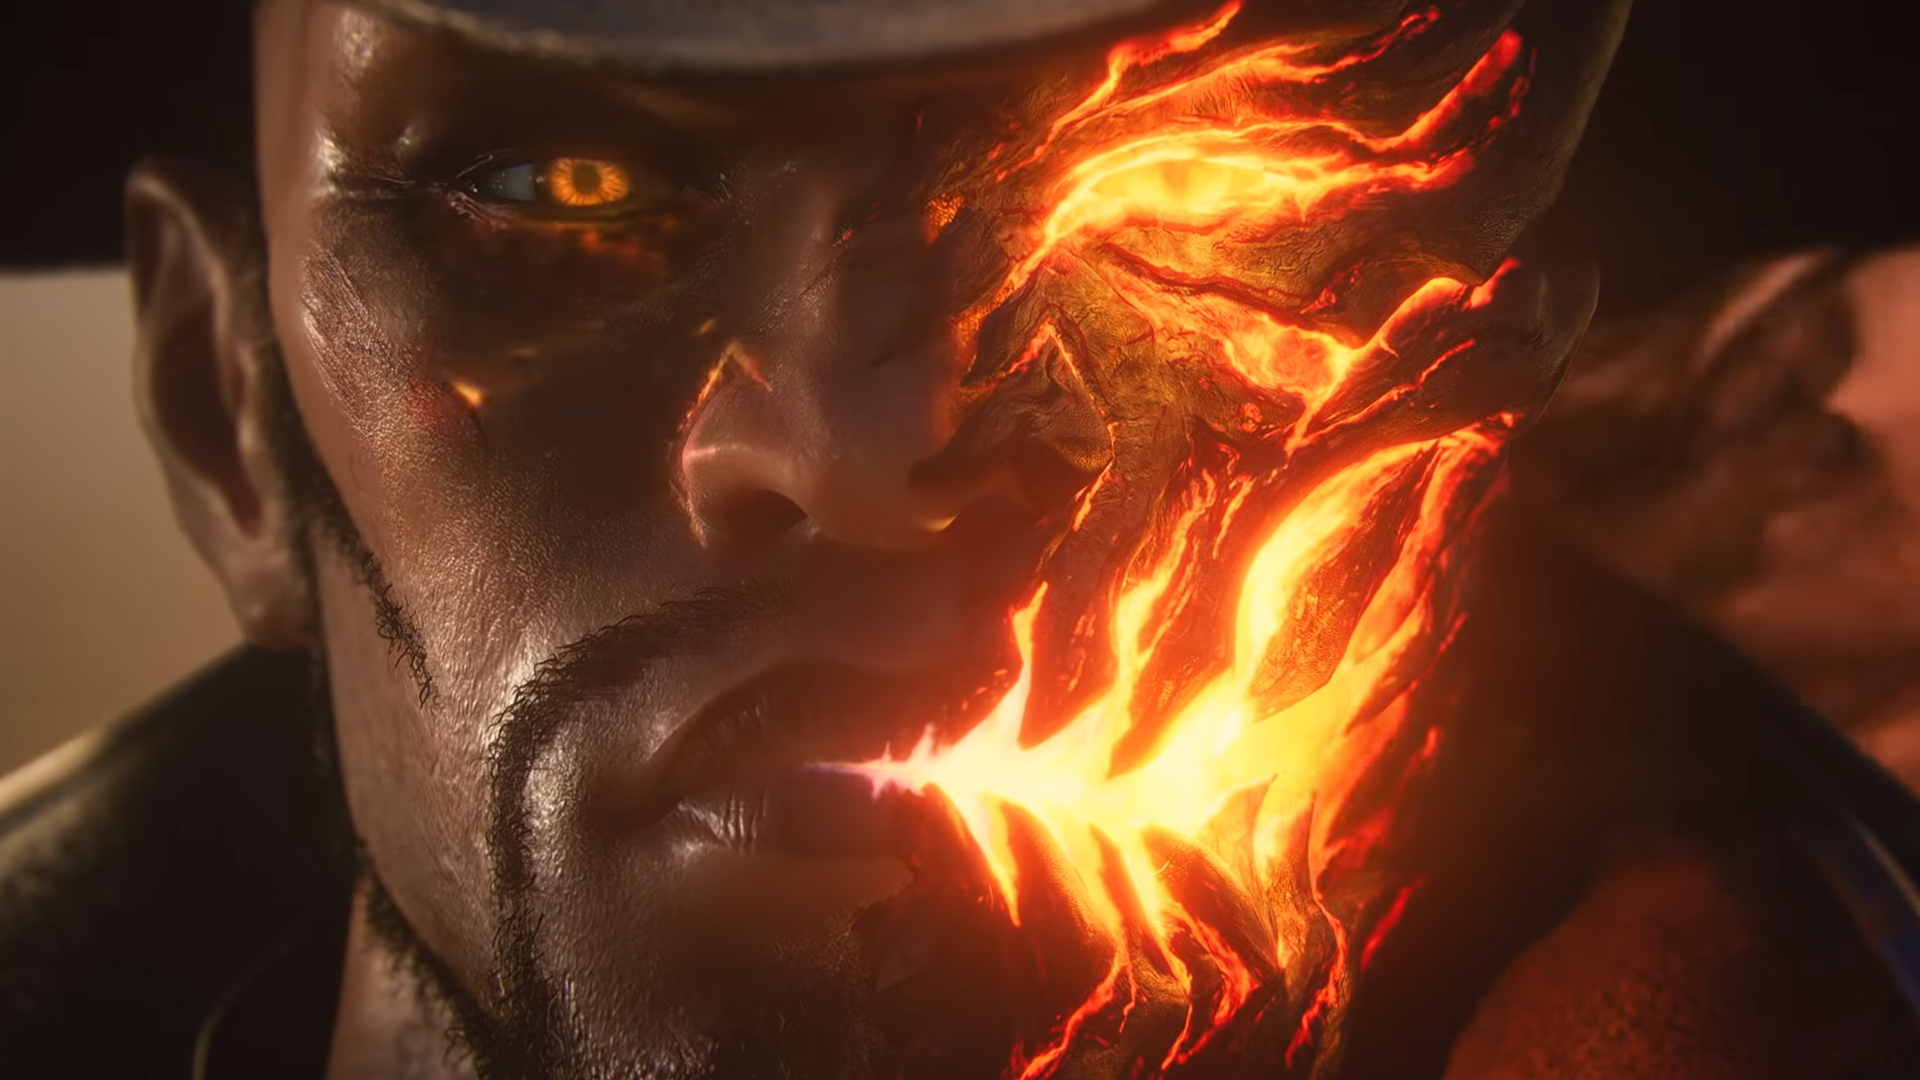 League of Legends gathers a posse of High Noon skins for Lucian, Thresh, and Urgot